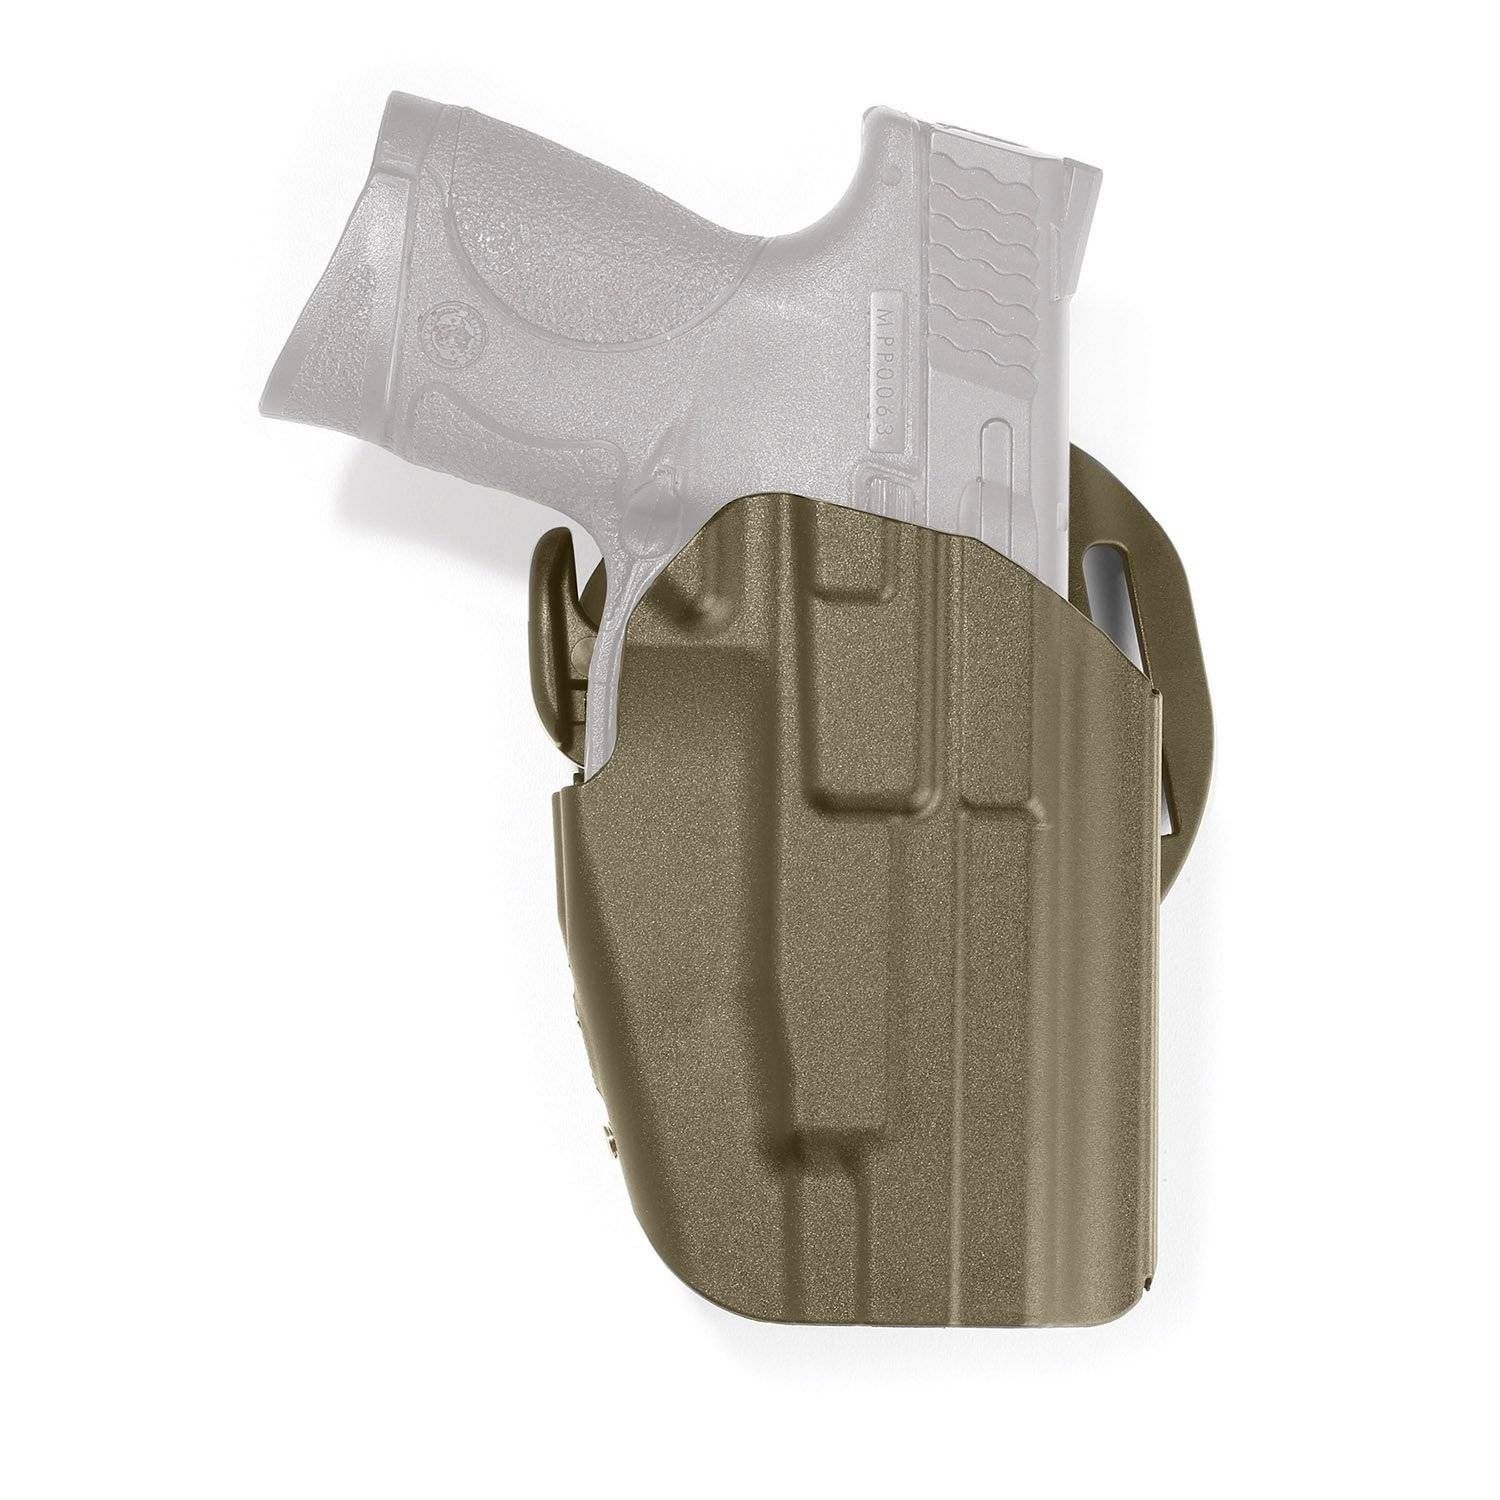 Safariland Holster Will Fit Chart